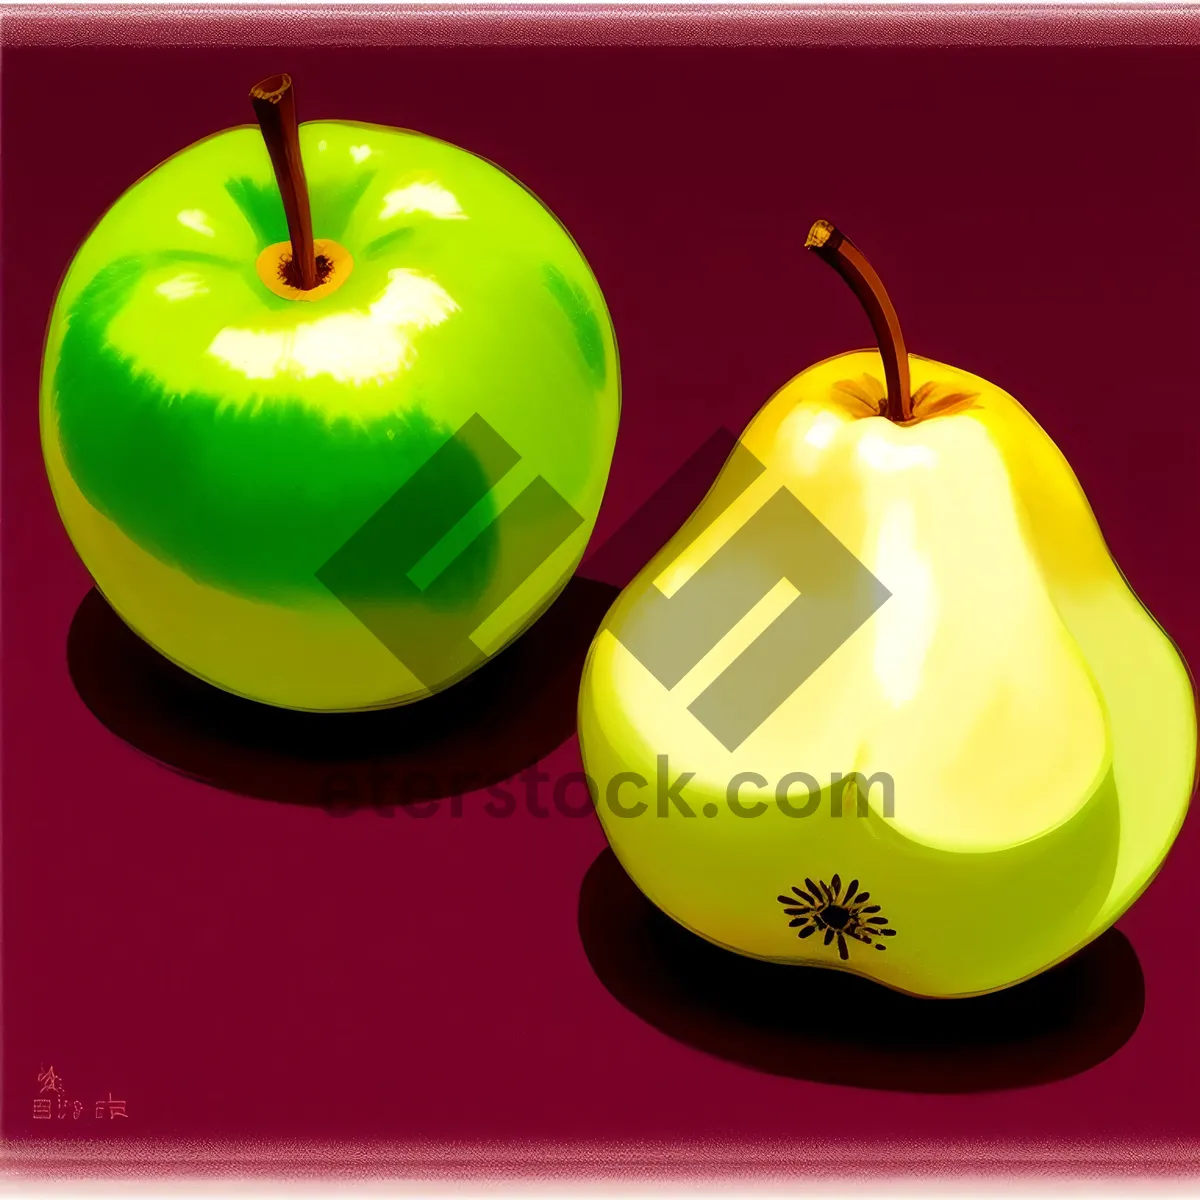 Picture of Fresh and Juicy Golden Delicious Apple